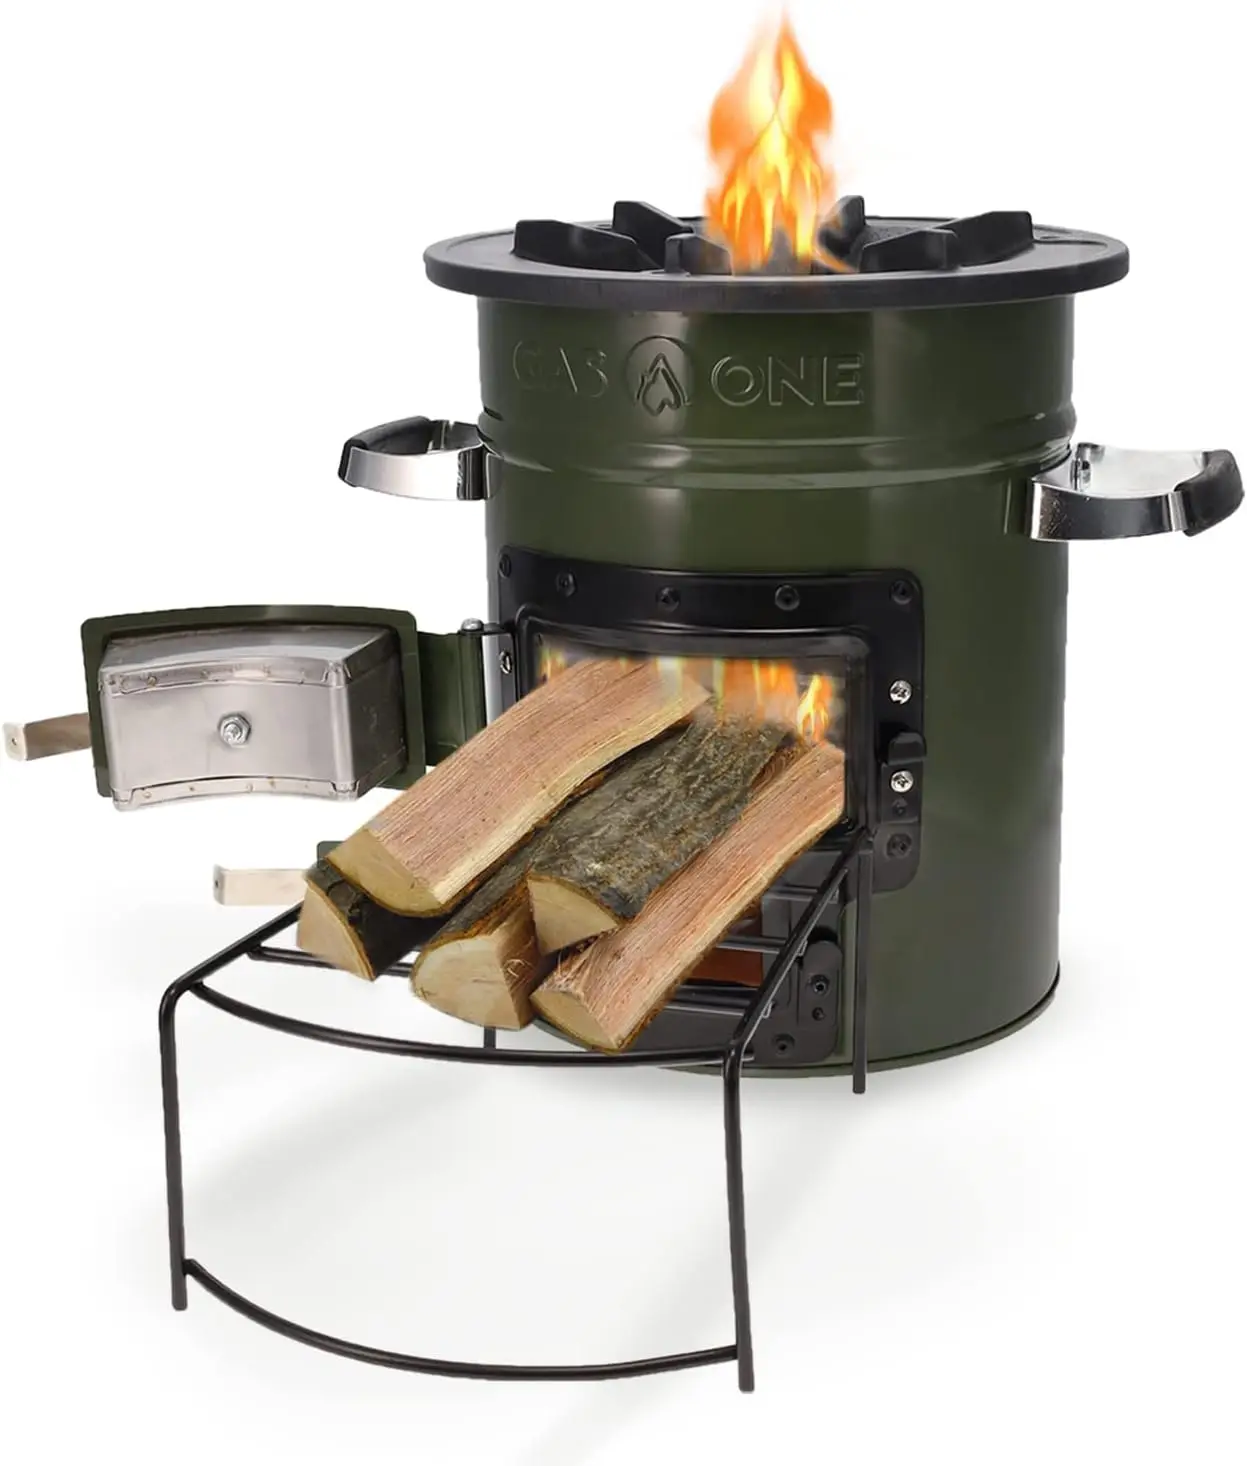 

Stove \u2013 Premium Wood Burning Stove Camping \u2013 Insulated Camping Rocket Stove for Backpacking, Hiking, RV and Survival -